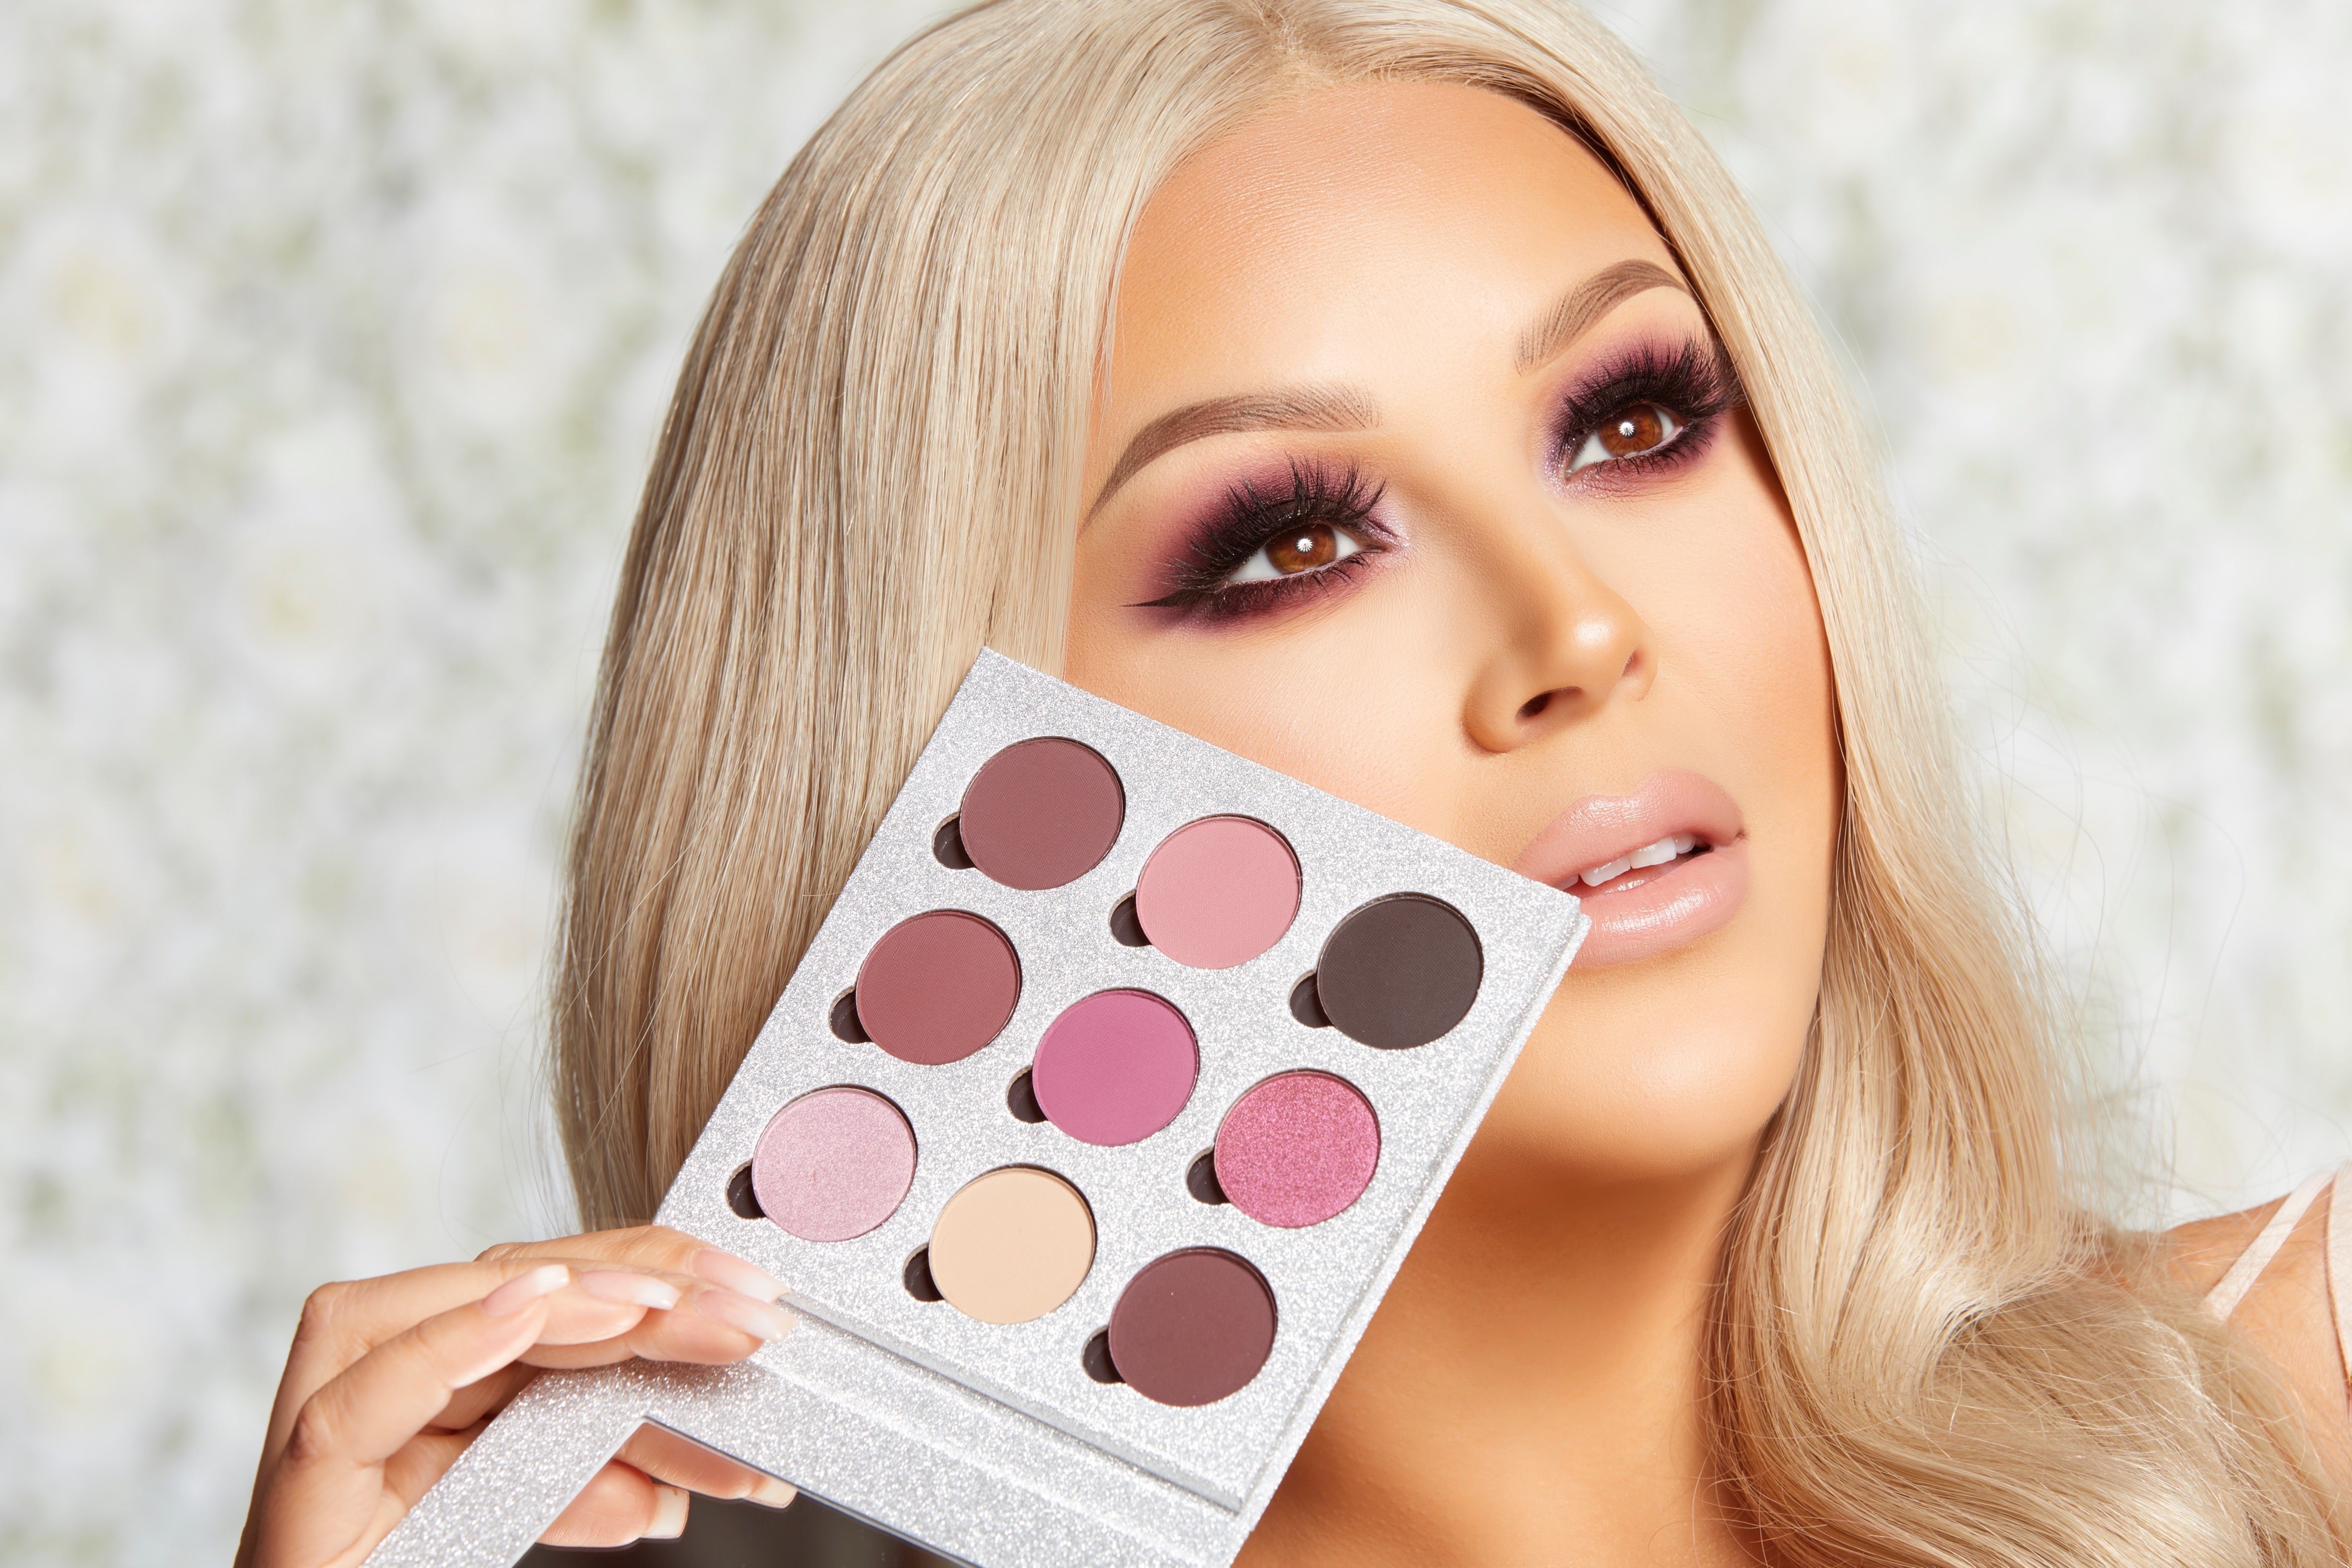 Not Your Average Mauves Eyeshadow Palette - Mom Boss Fitness